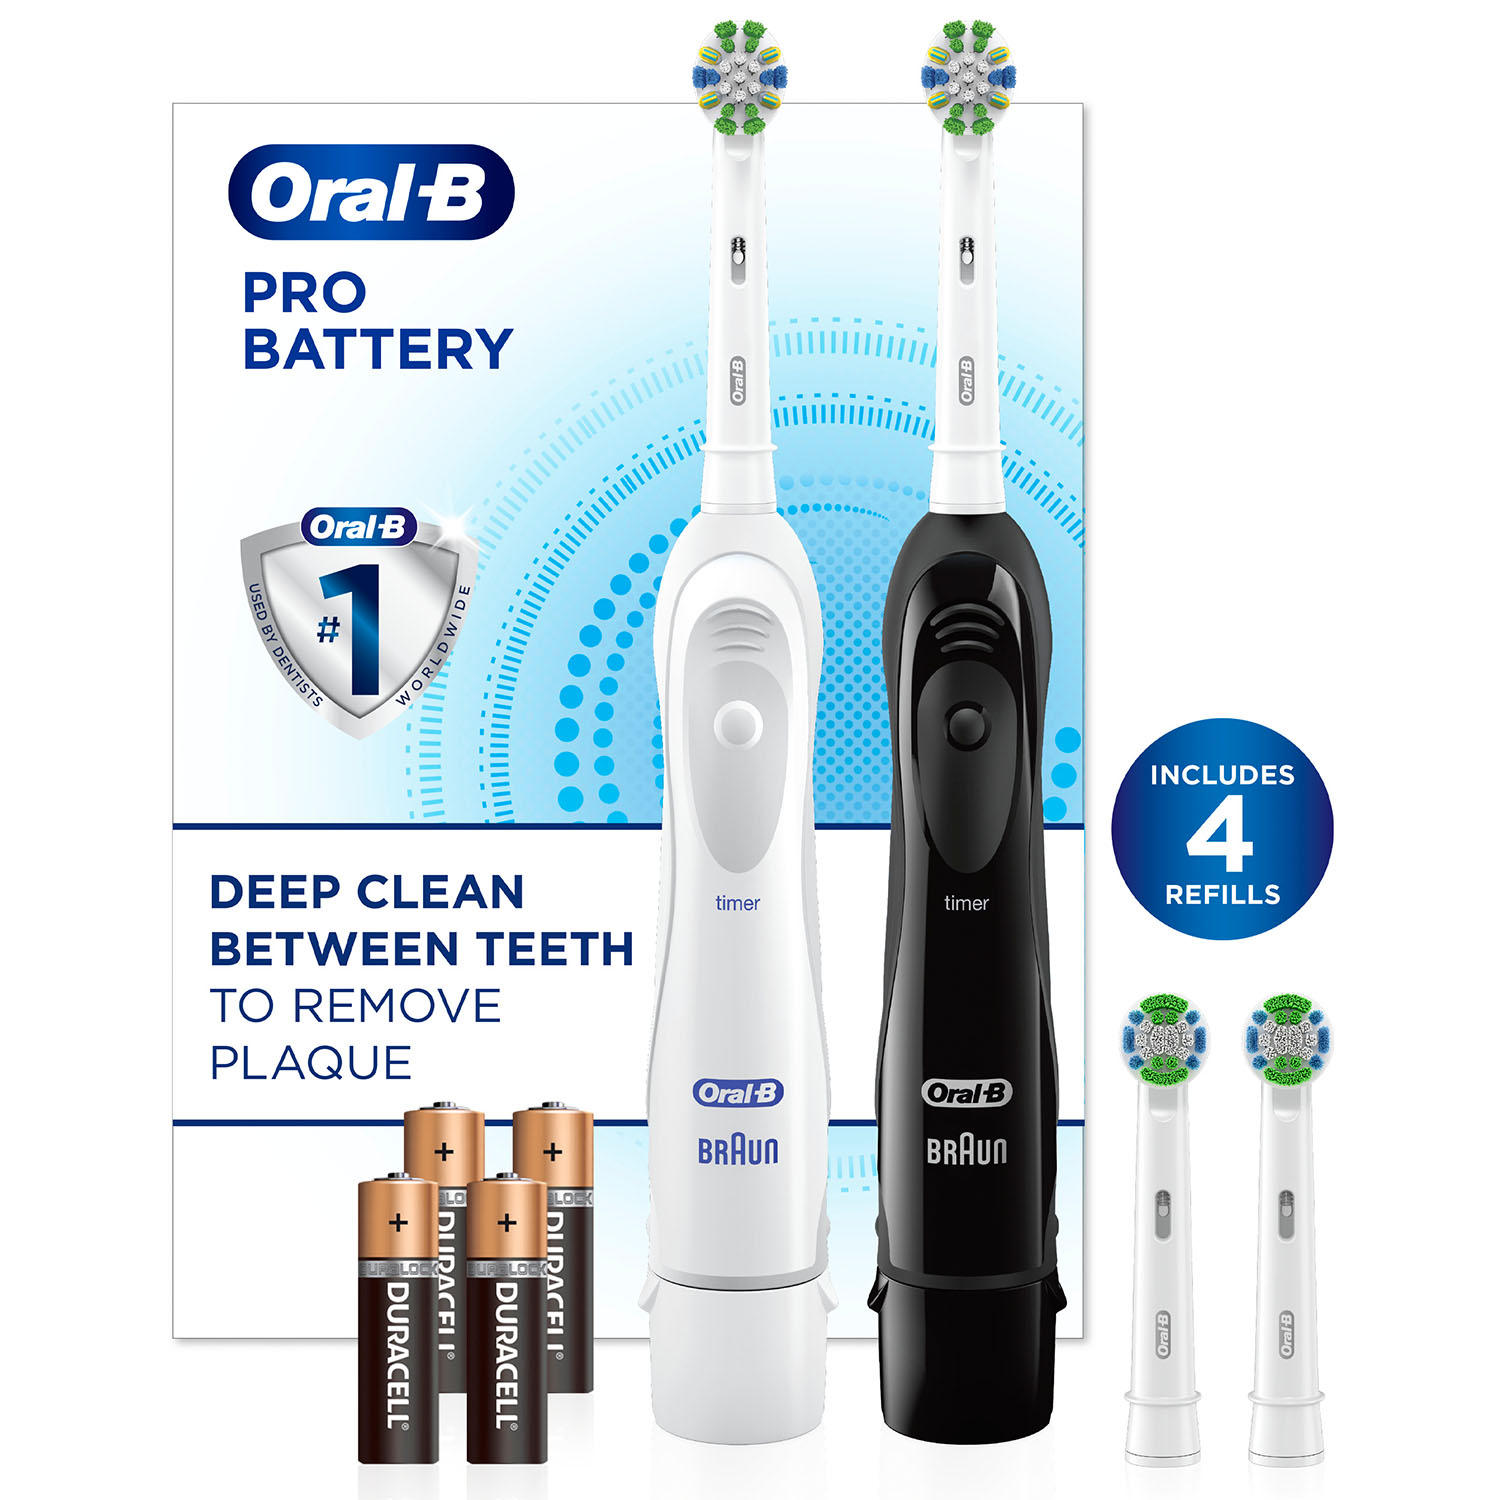 2-Pack Oral-B Pro Advantage Battery Powered Toothbrush